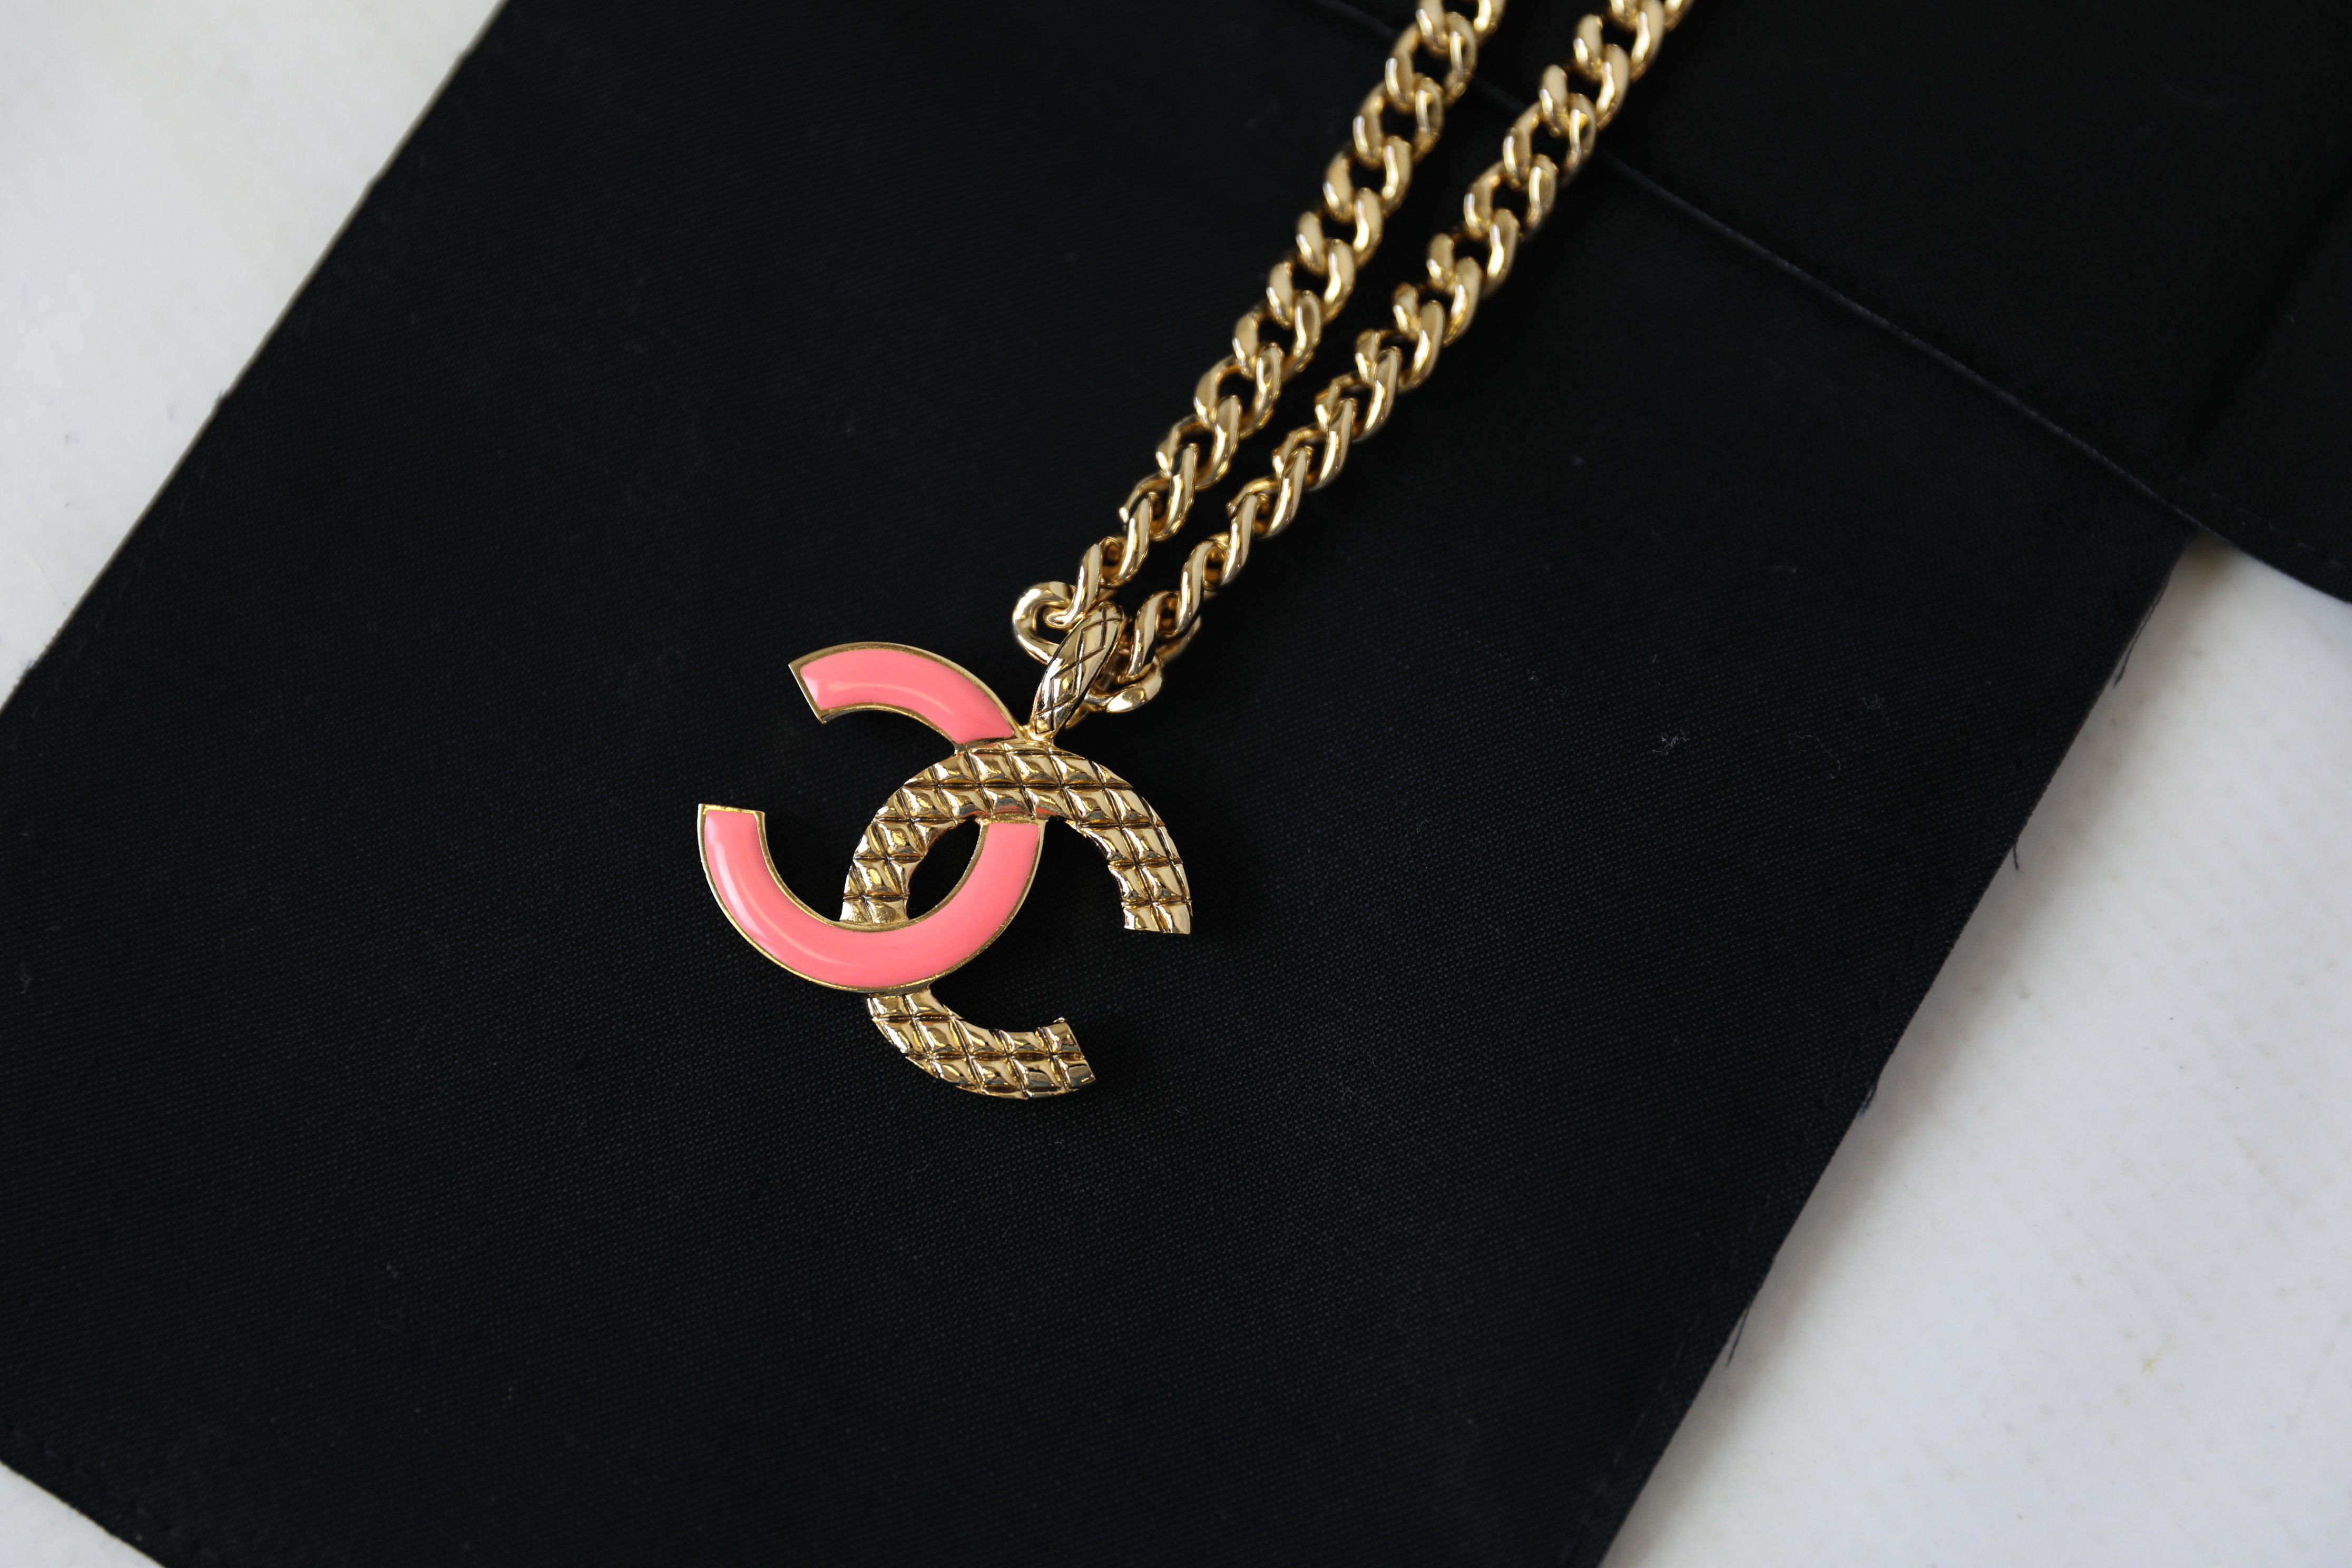 Chanel Chain Link Necklace with Gold and Pink CC, New in Box WA001